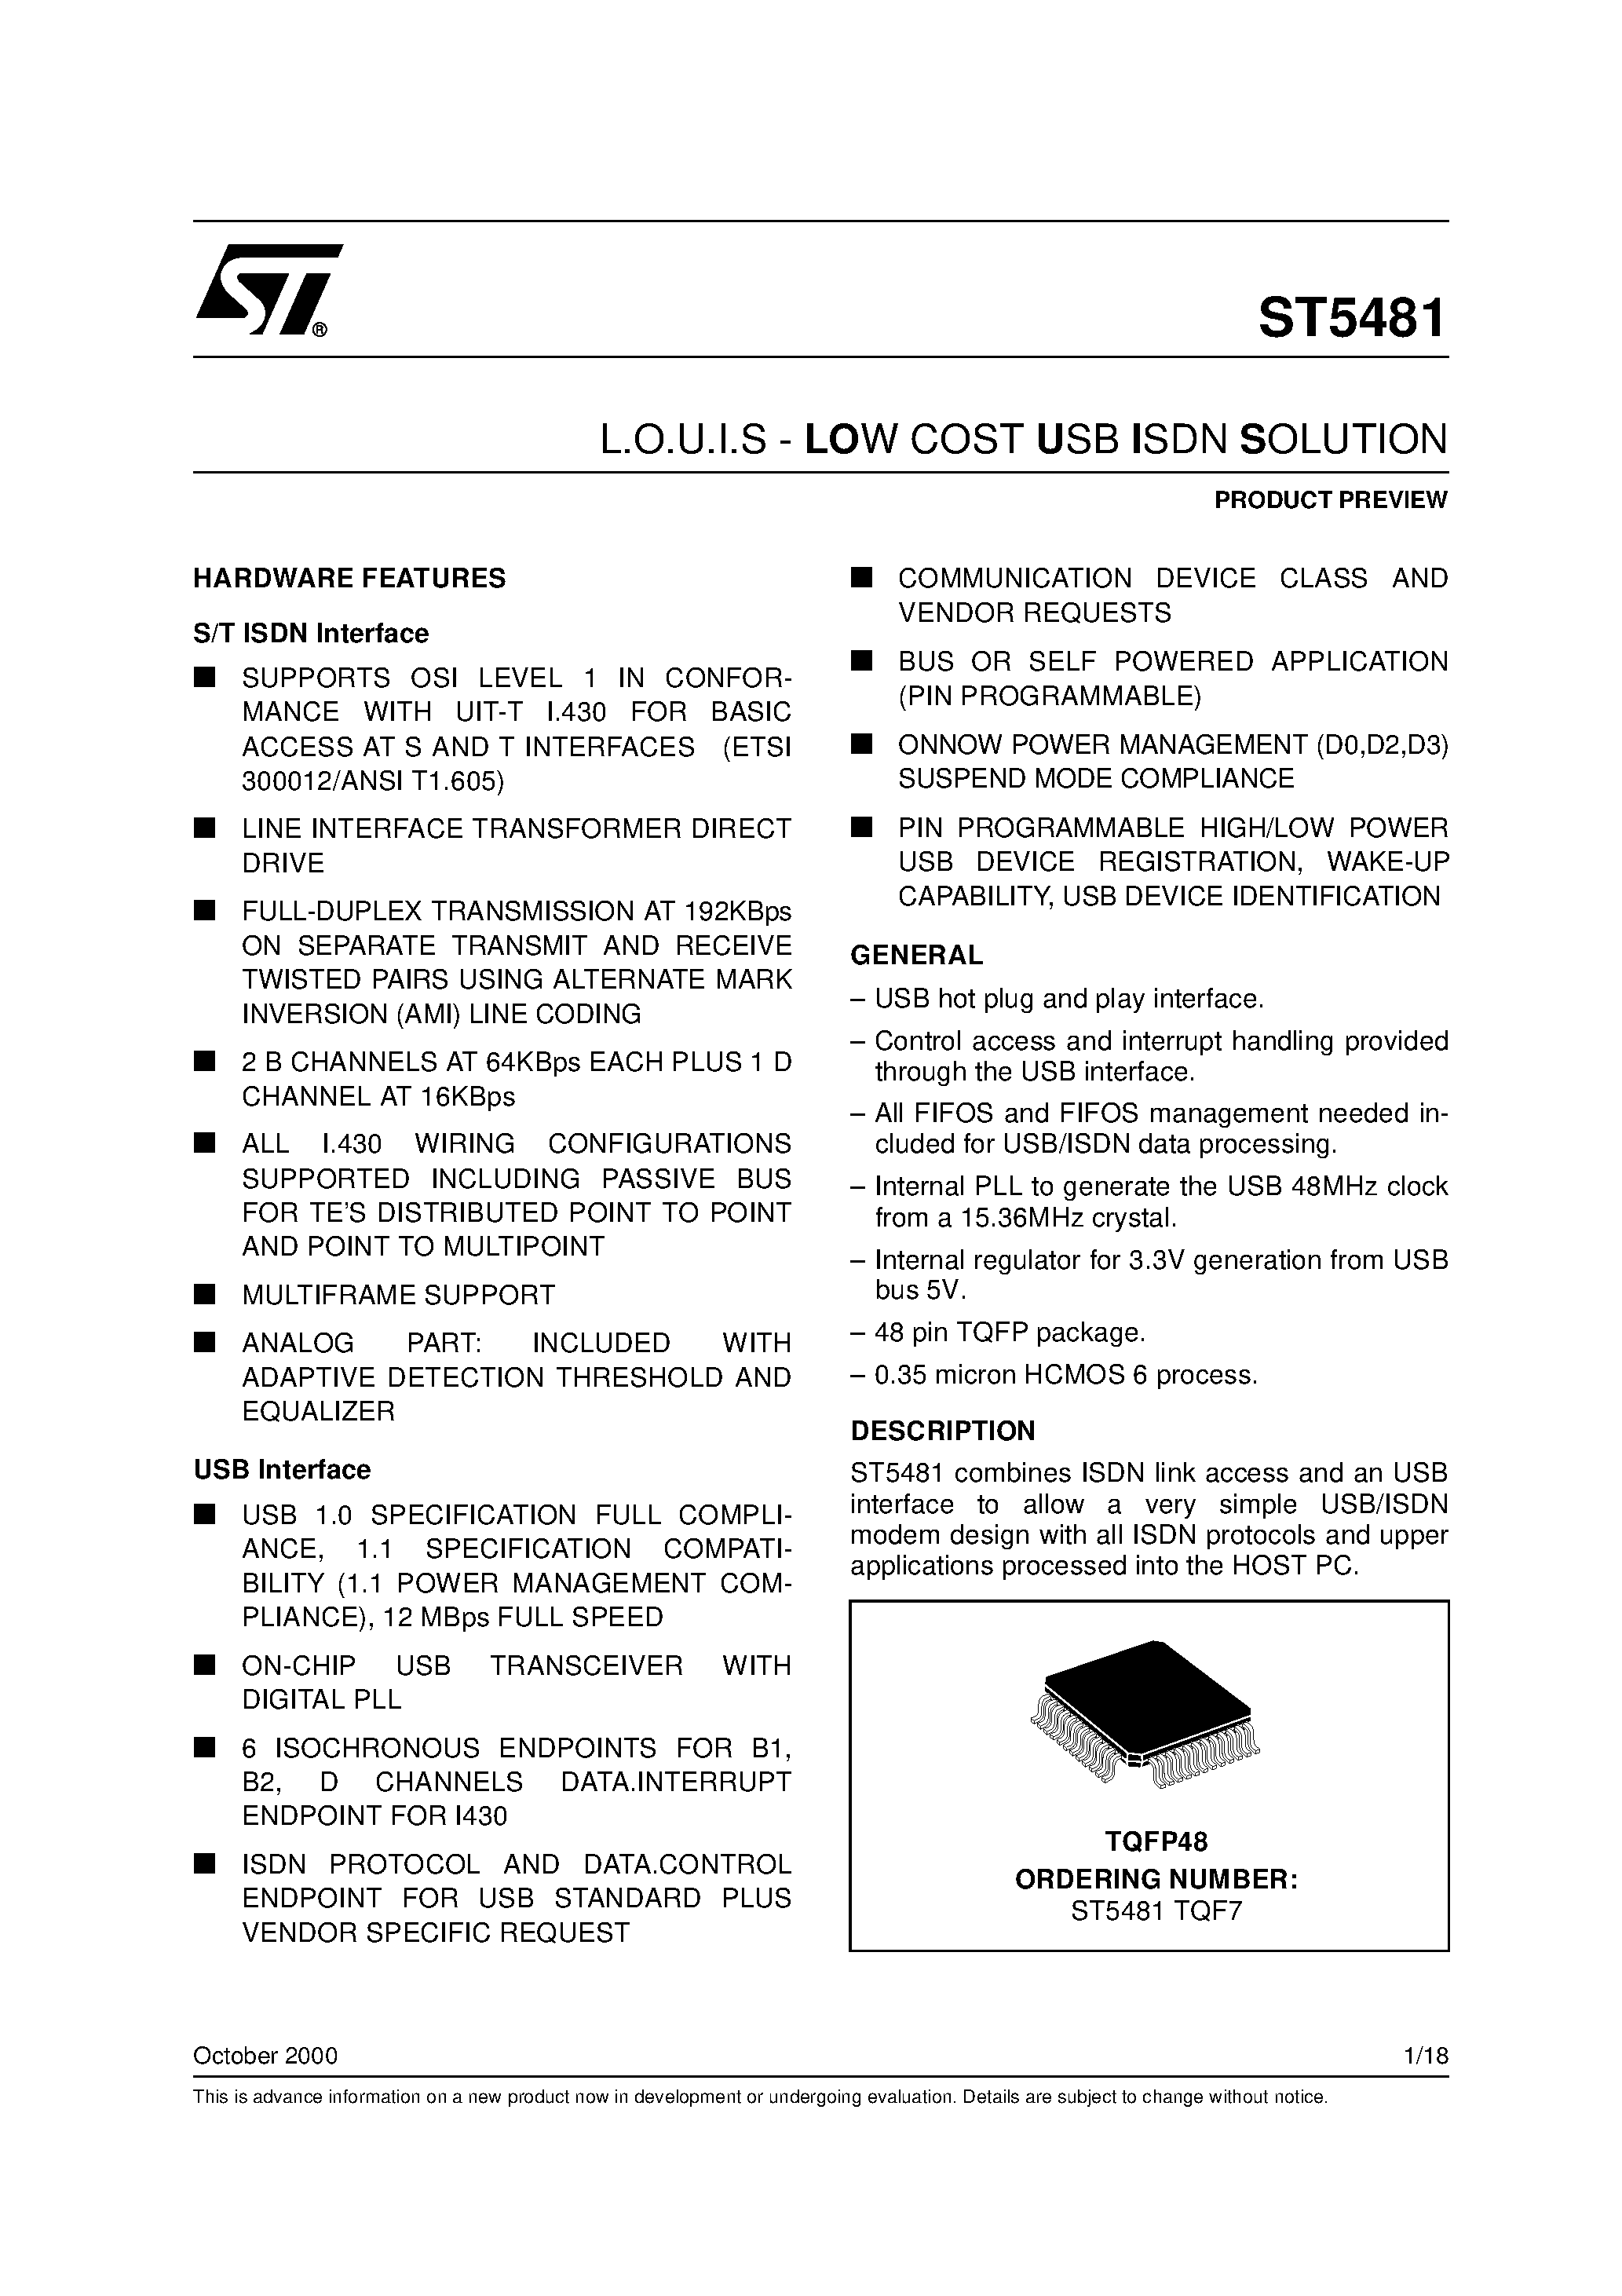 Datasheet ST5481 - L.O.U.I.S - LOW COST USB ISDN SOLUTION page 1